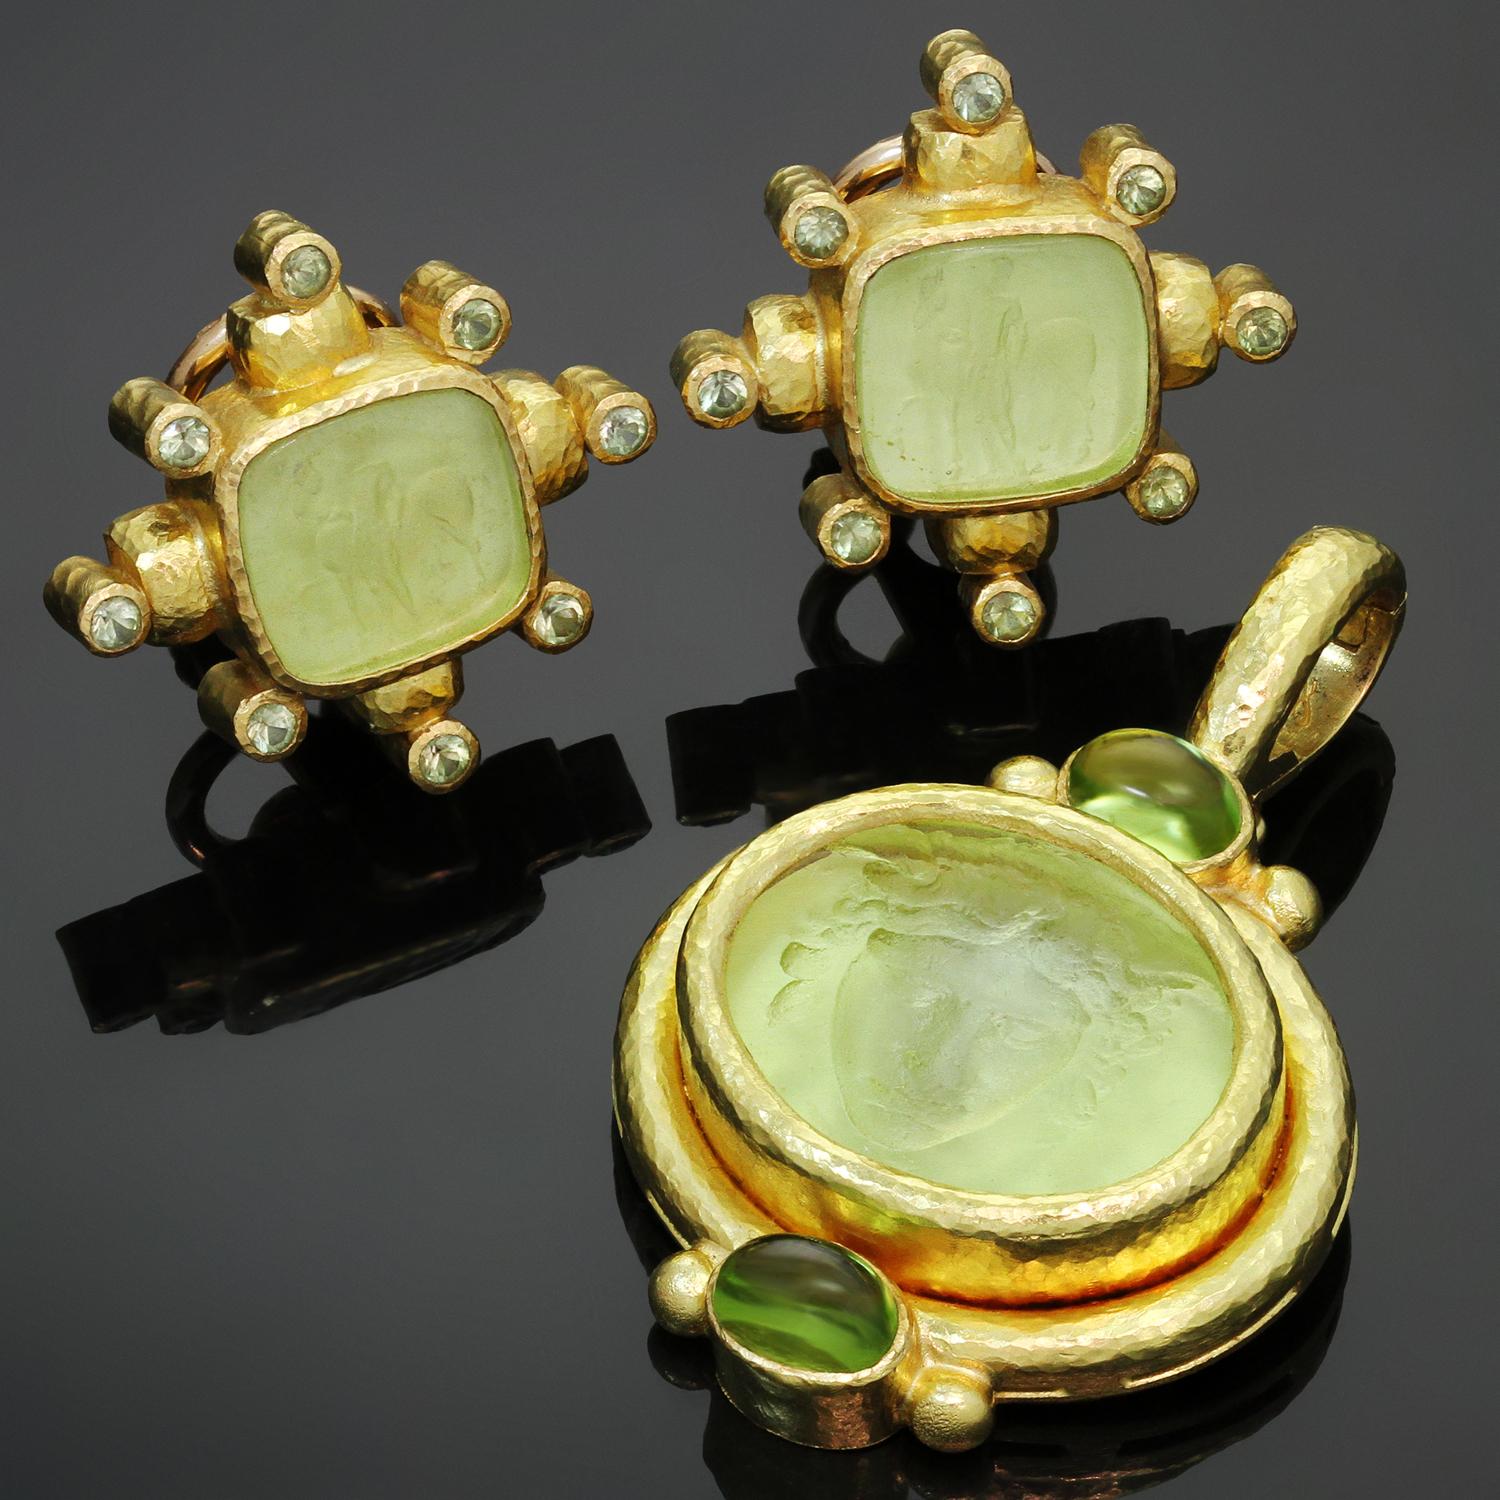 This gorgeous Elizabeth Locke earrings and pendant set is crafted out of 19-karat hand-hammered yellow gold and features light green Venetian glass intaglios with mother-of-pearl backs. These modern intaglios feature classic 17th century molds. The